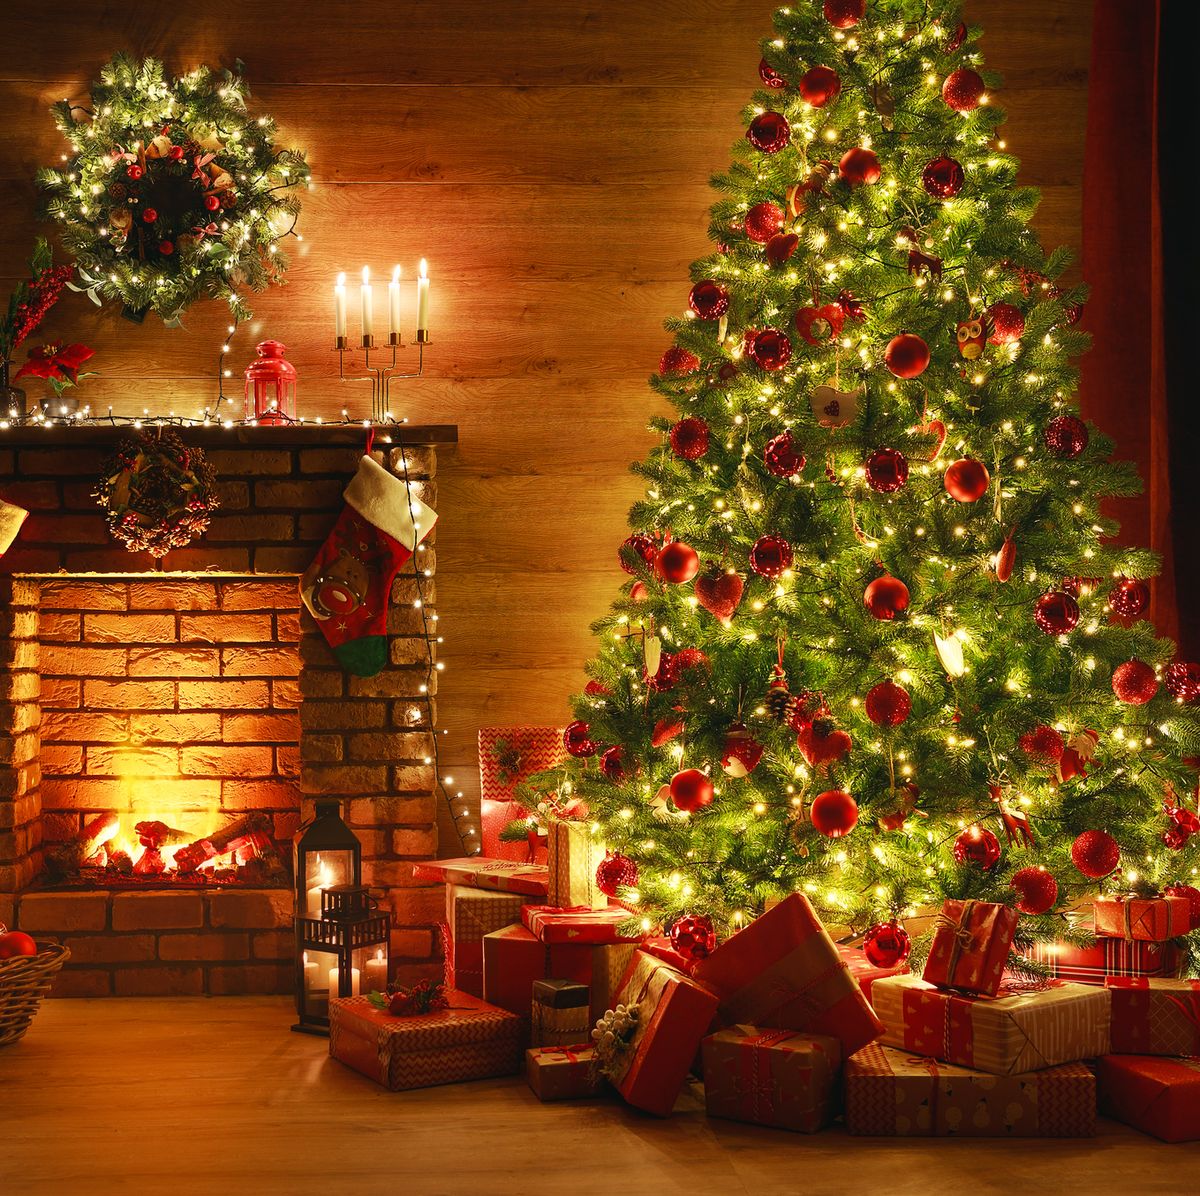 https://hips.hearstapps.com/hmg-prod/images/interior-christmas-magic-glowing-tree-fireplace-royalty-free-image-1628537941.jpg?crop=0.614xw:1.00xh;0.337xw,0&resize=1200:*